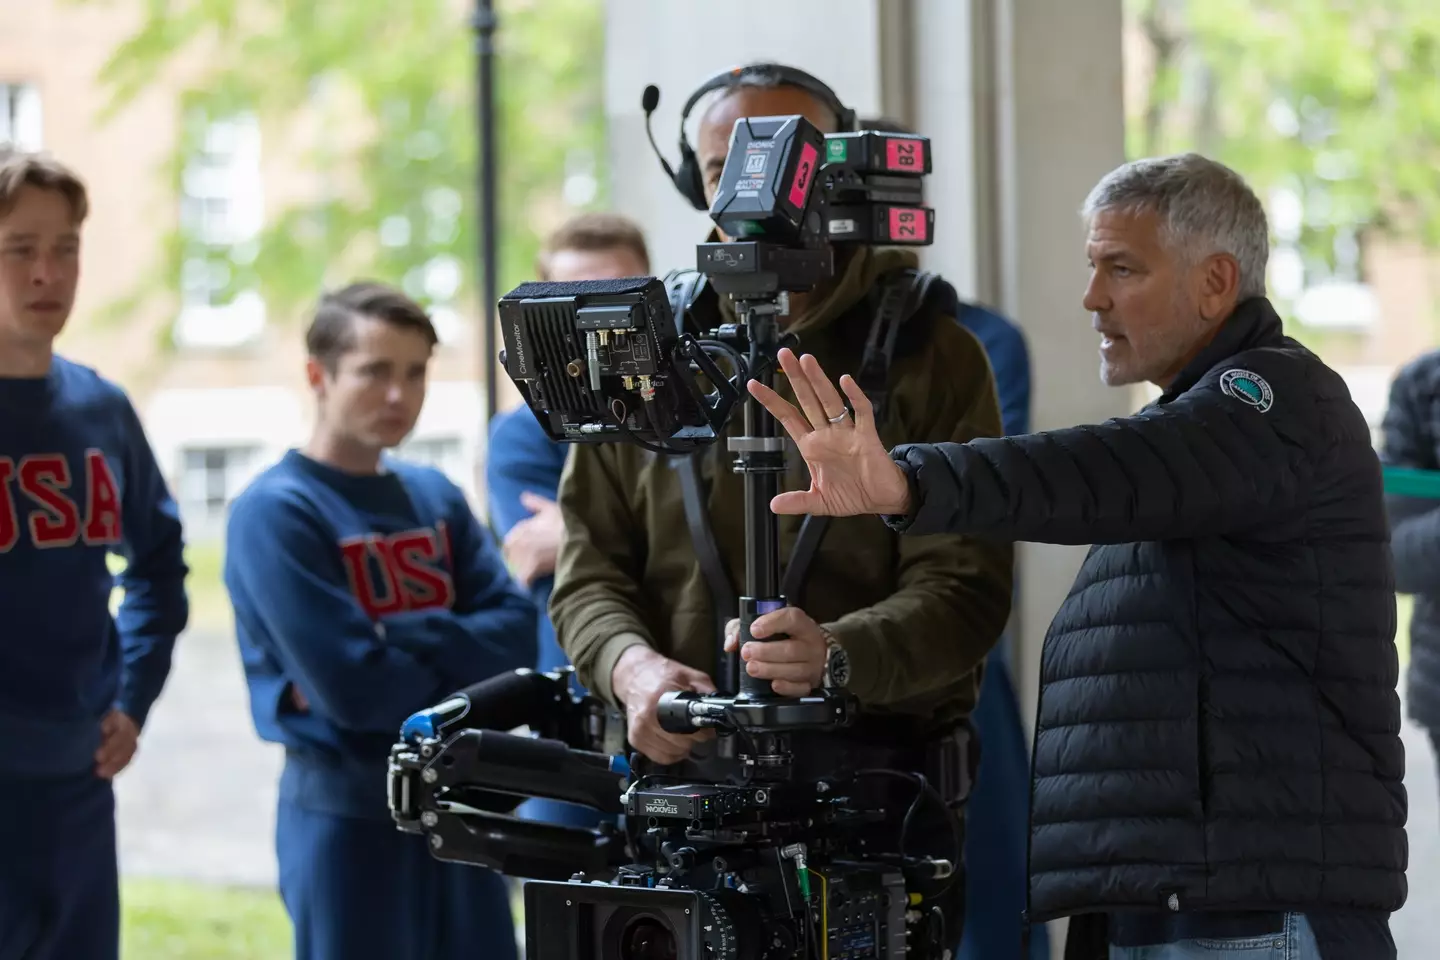 Clooney acted as a director on the movie.